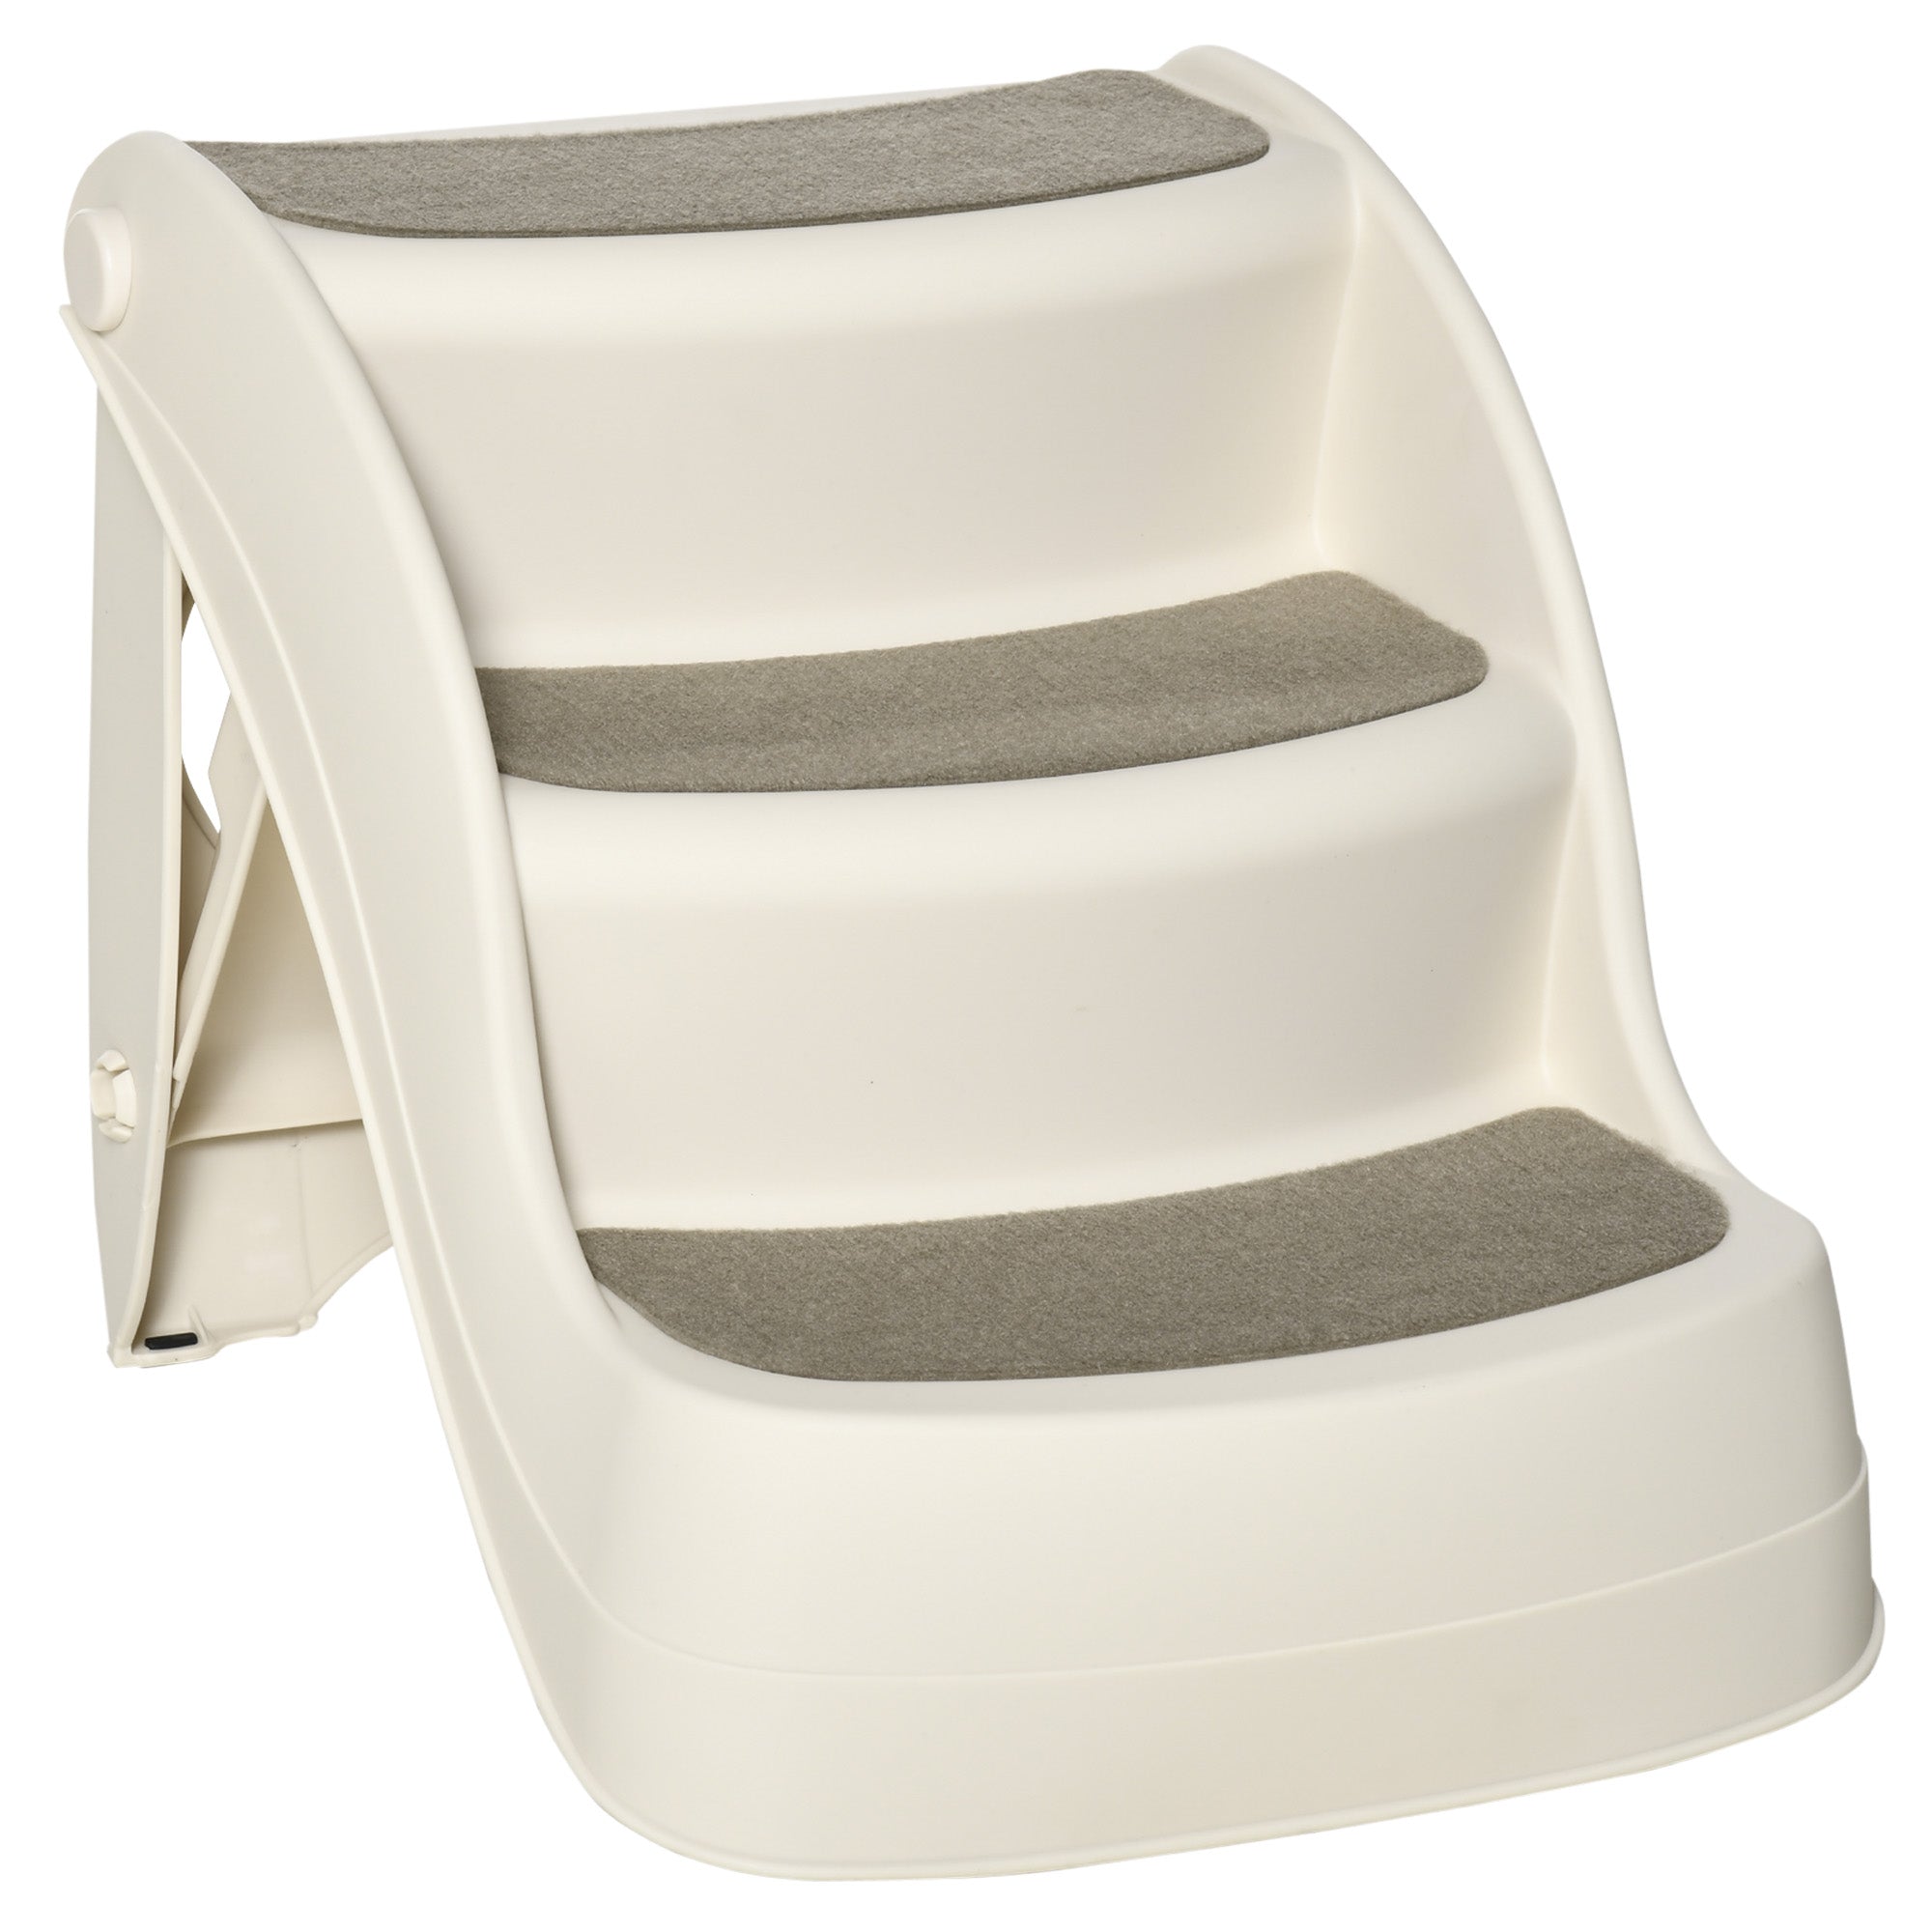 PawHut Foldable Pet Stairs 3 Steps with Non-slip Mats for Small Dogs - Cream  | TJ Hughes